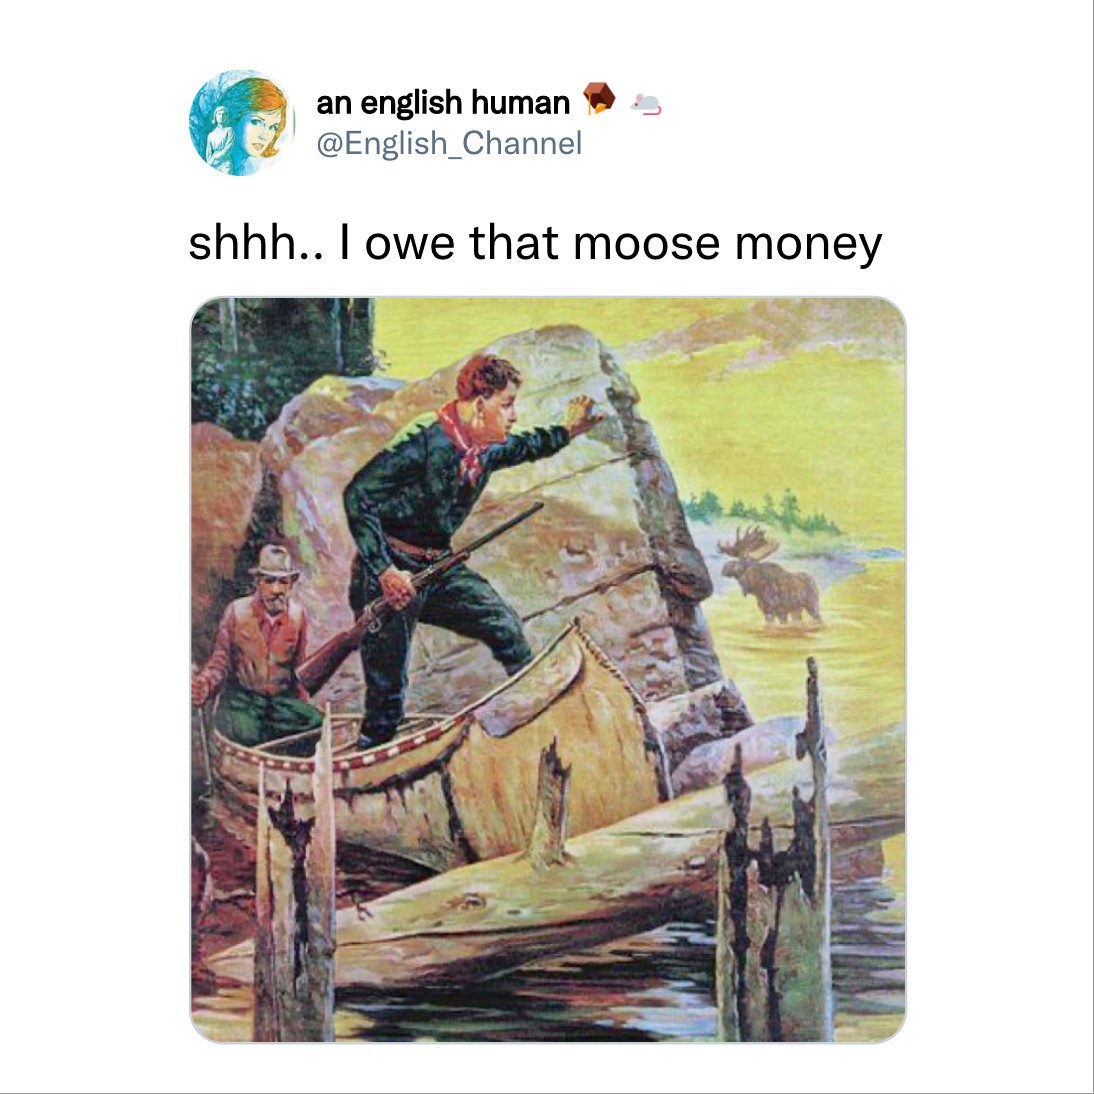 funny tweets - man and guide in canoe - an english human shhh.. I owe that moose money